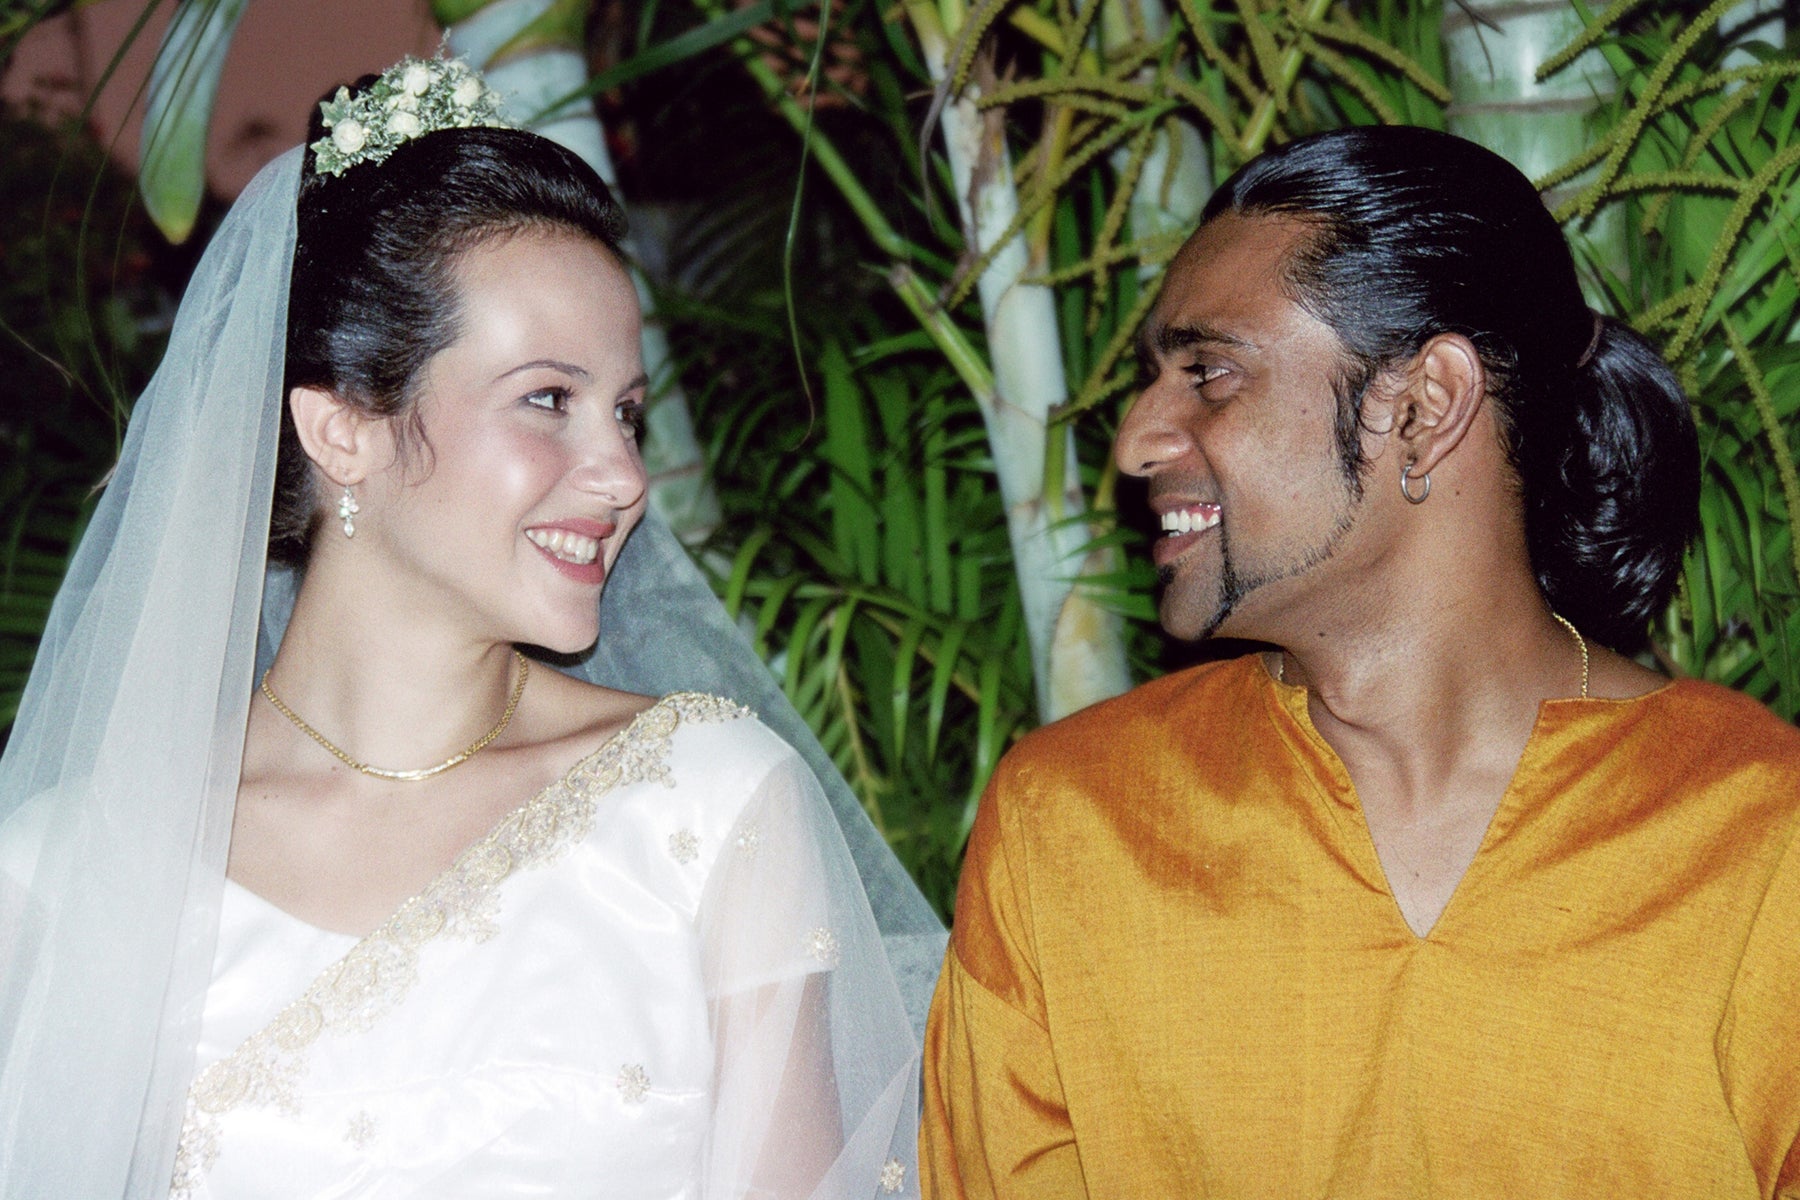 Wedding portrait of Chas Organics founders Marise May and Chanaka Kurera. Marise is wearing a traditional western wedding gown and Chanaka is wearing an orange saree. 